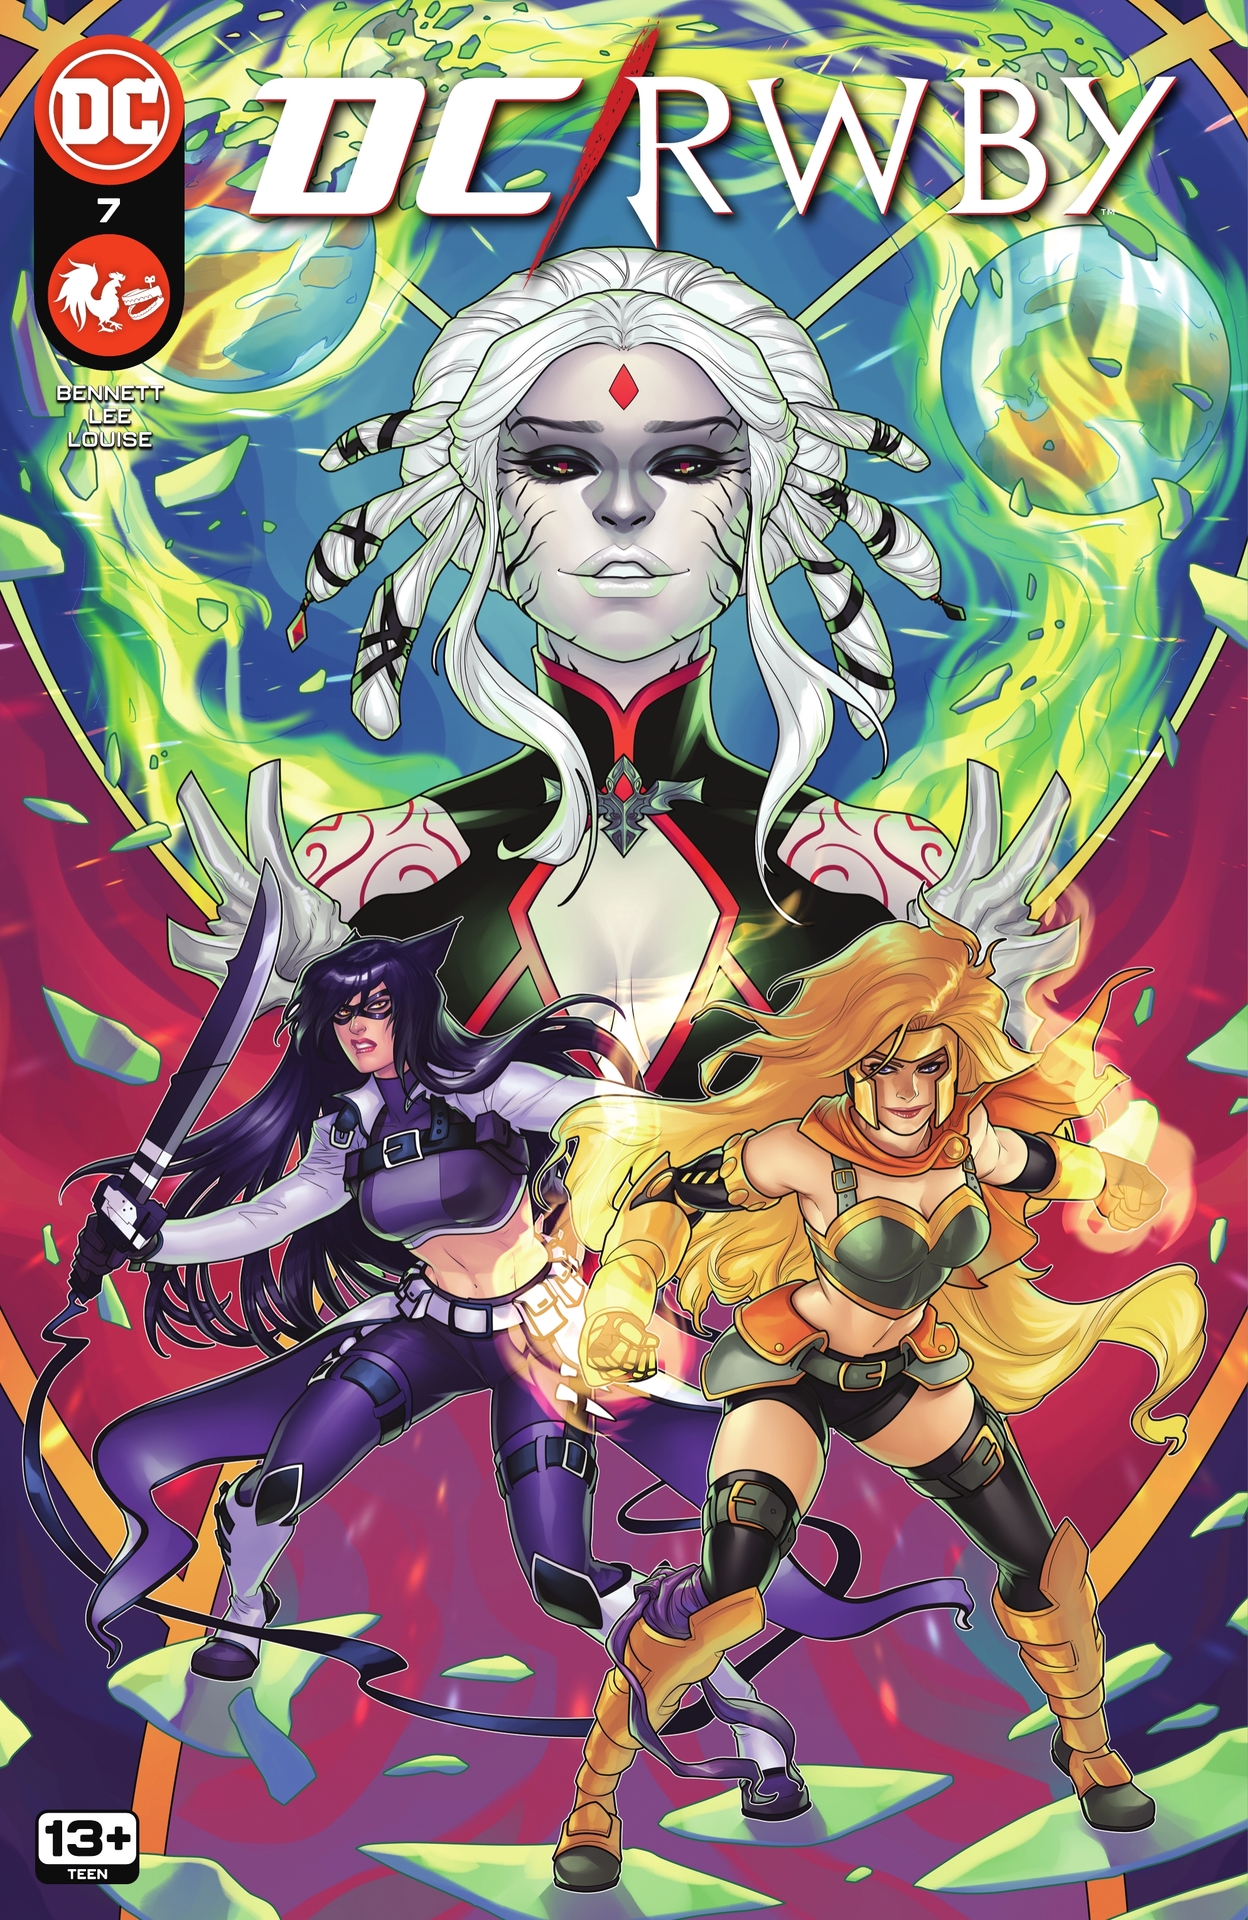 Read online DC/RWBY comic -  Issue #7 - 1